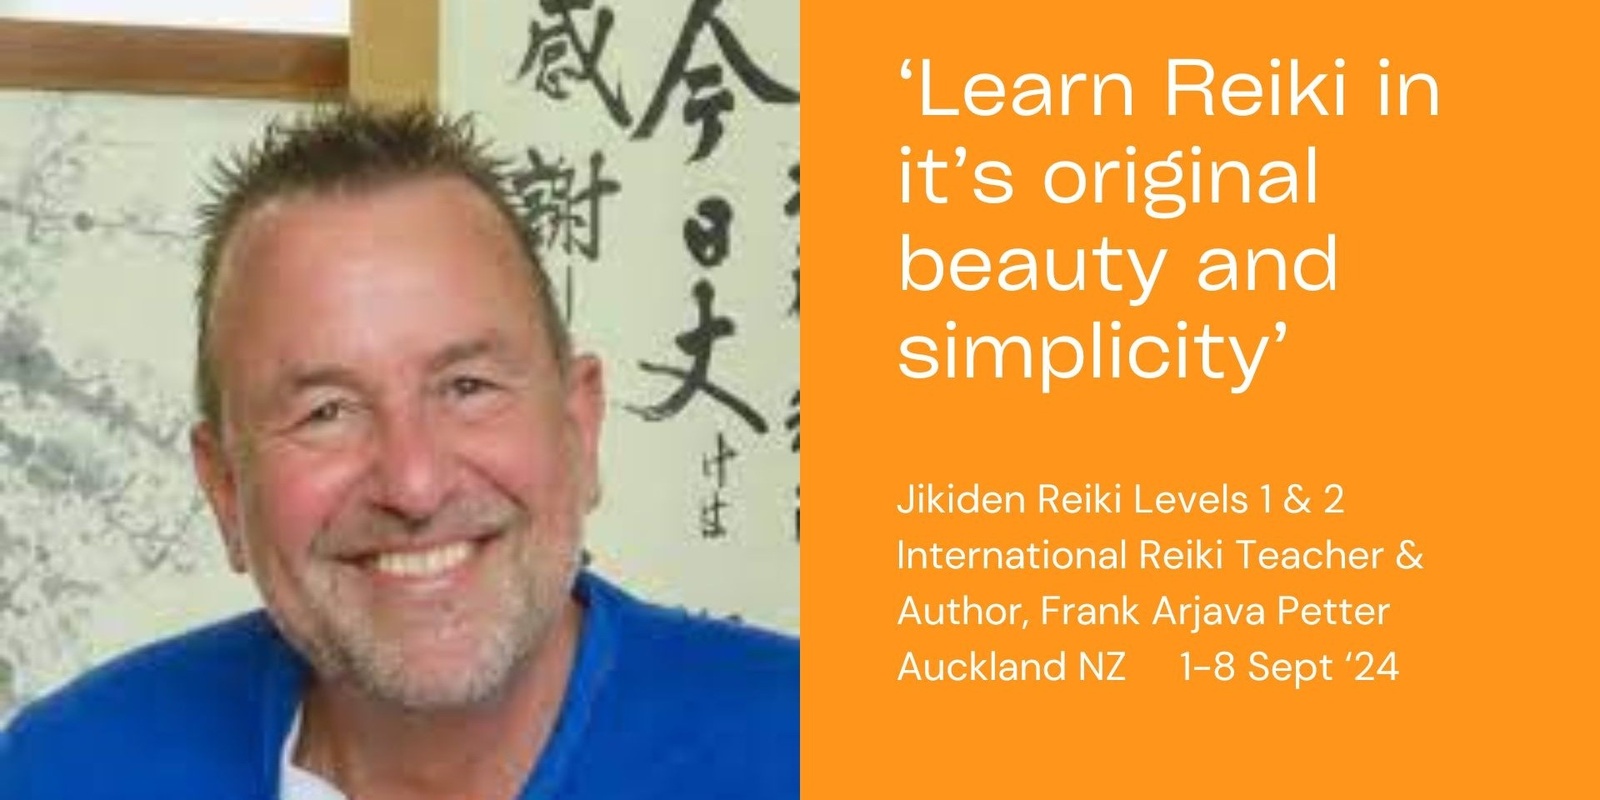 Banner image for Jikiden Reiki Class, Levels 1 & 2 , Auckland NZ, 2-6 Sept '24 with Frank Arjava Petter